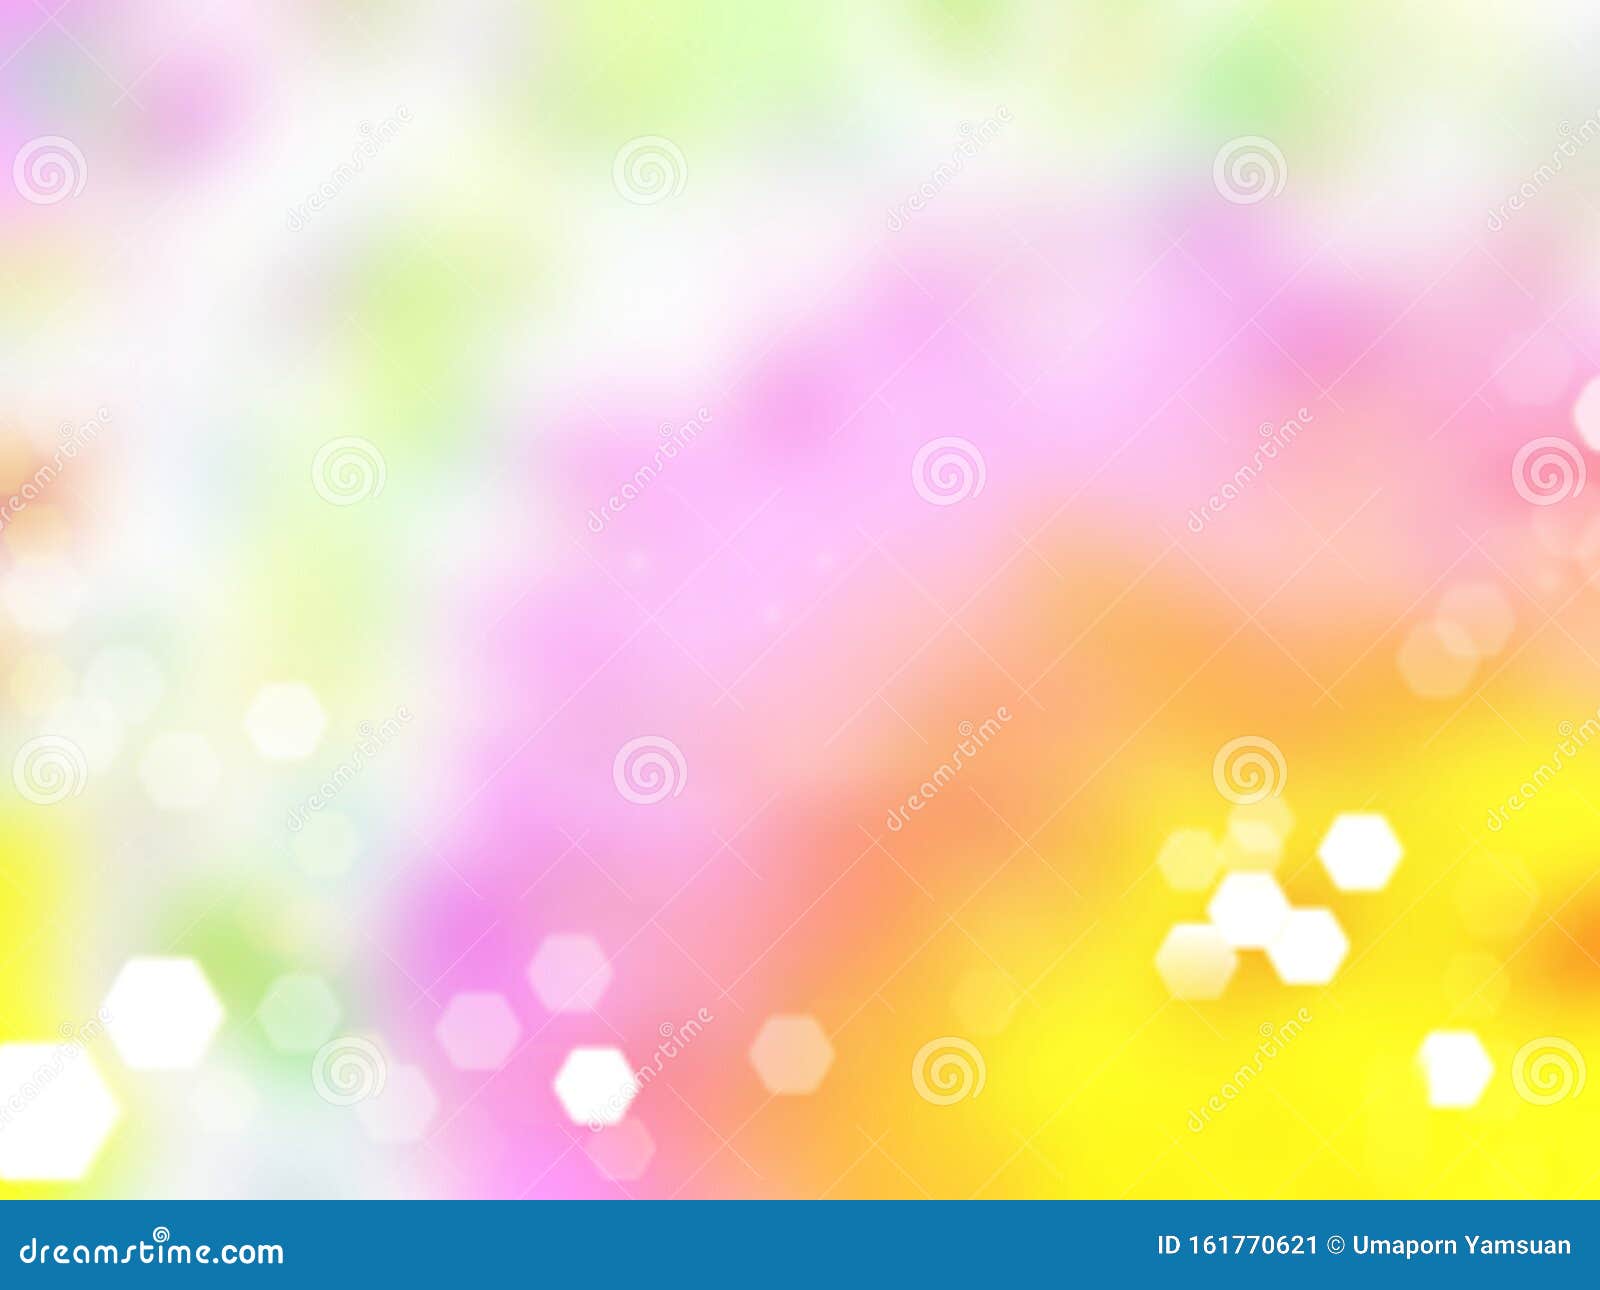 Colorful Abstract Background with Bokeh Light for Desktop Wallpaper for  Website Design, Holiday, Christmas and New Year Background Stock  Illustration - Illustration of celebration, blur: 161770621